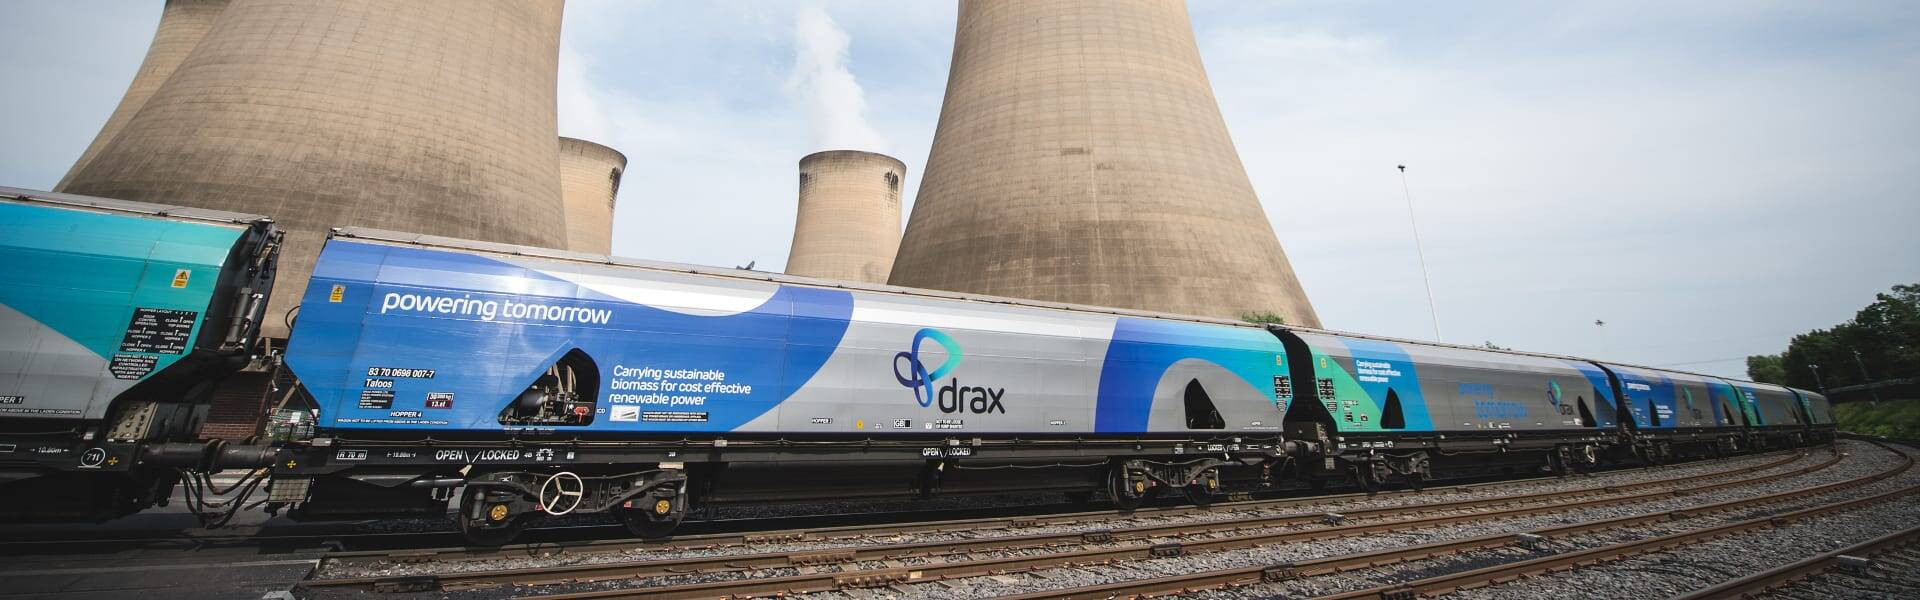 GIB provides Drax with £100 million loan for conversion to biomass